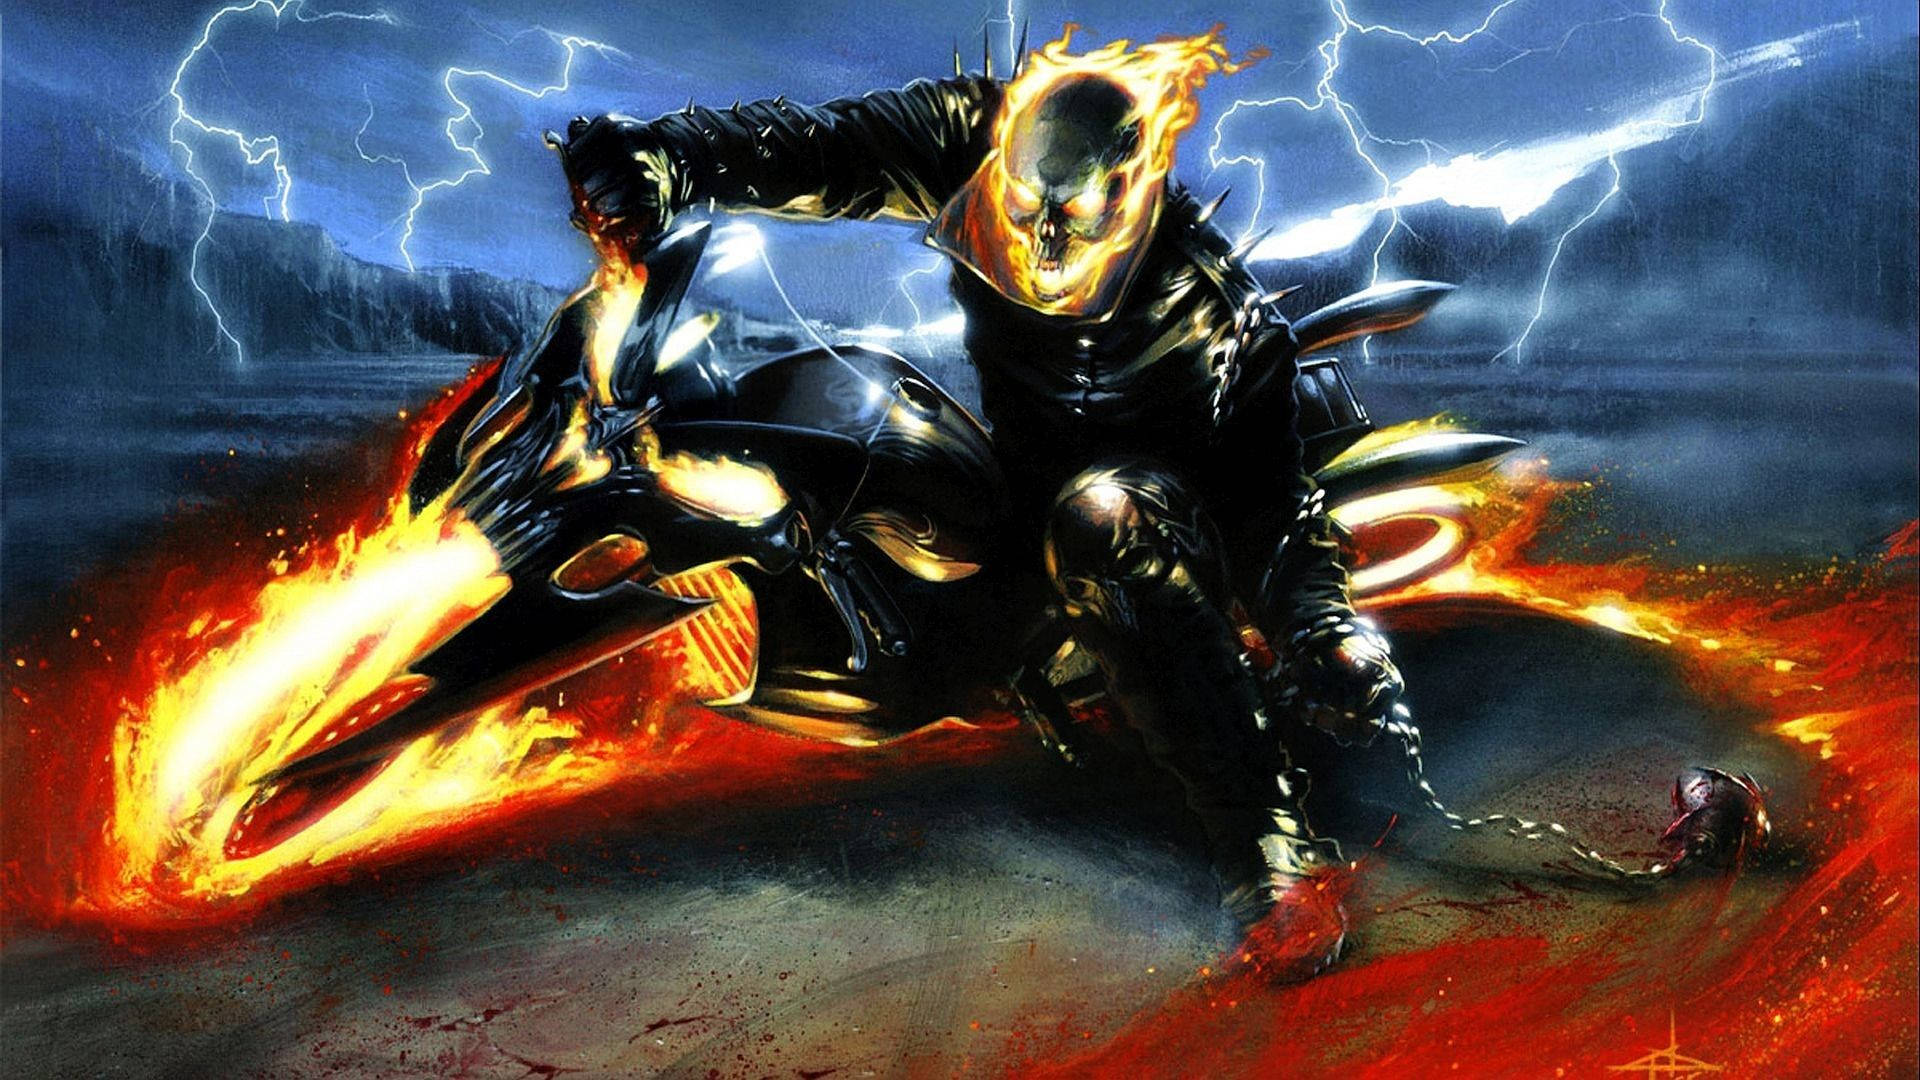 Blue Ghost Rider Lightning And Flame Wallpaper